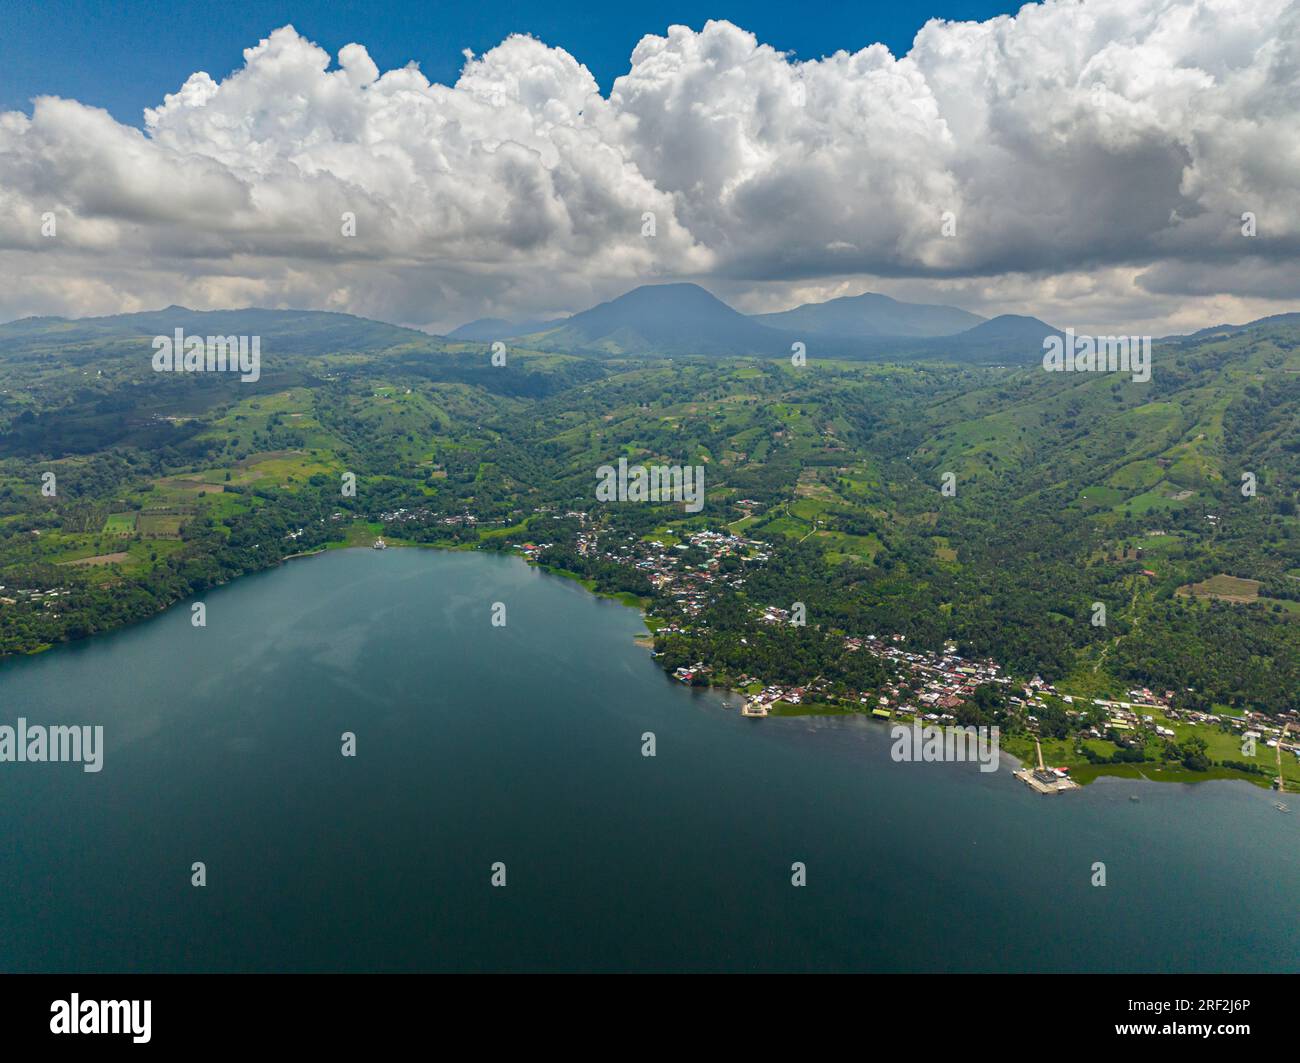 Lanao del Sur: Lake Lanao and mountain with rainforest and town. Mindanao, Philippines. Stock Photo